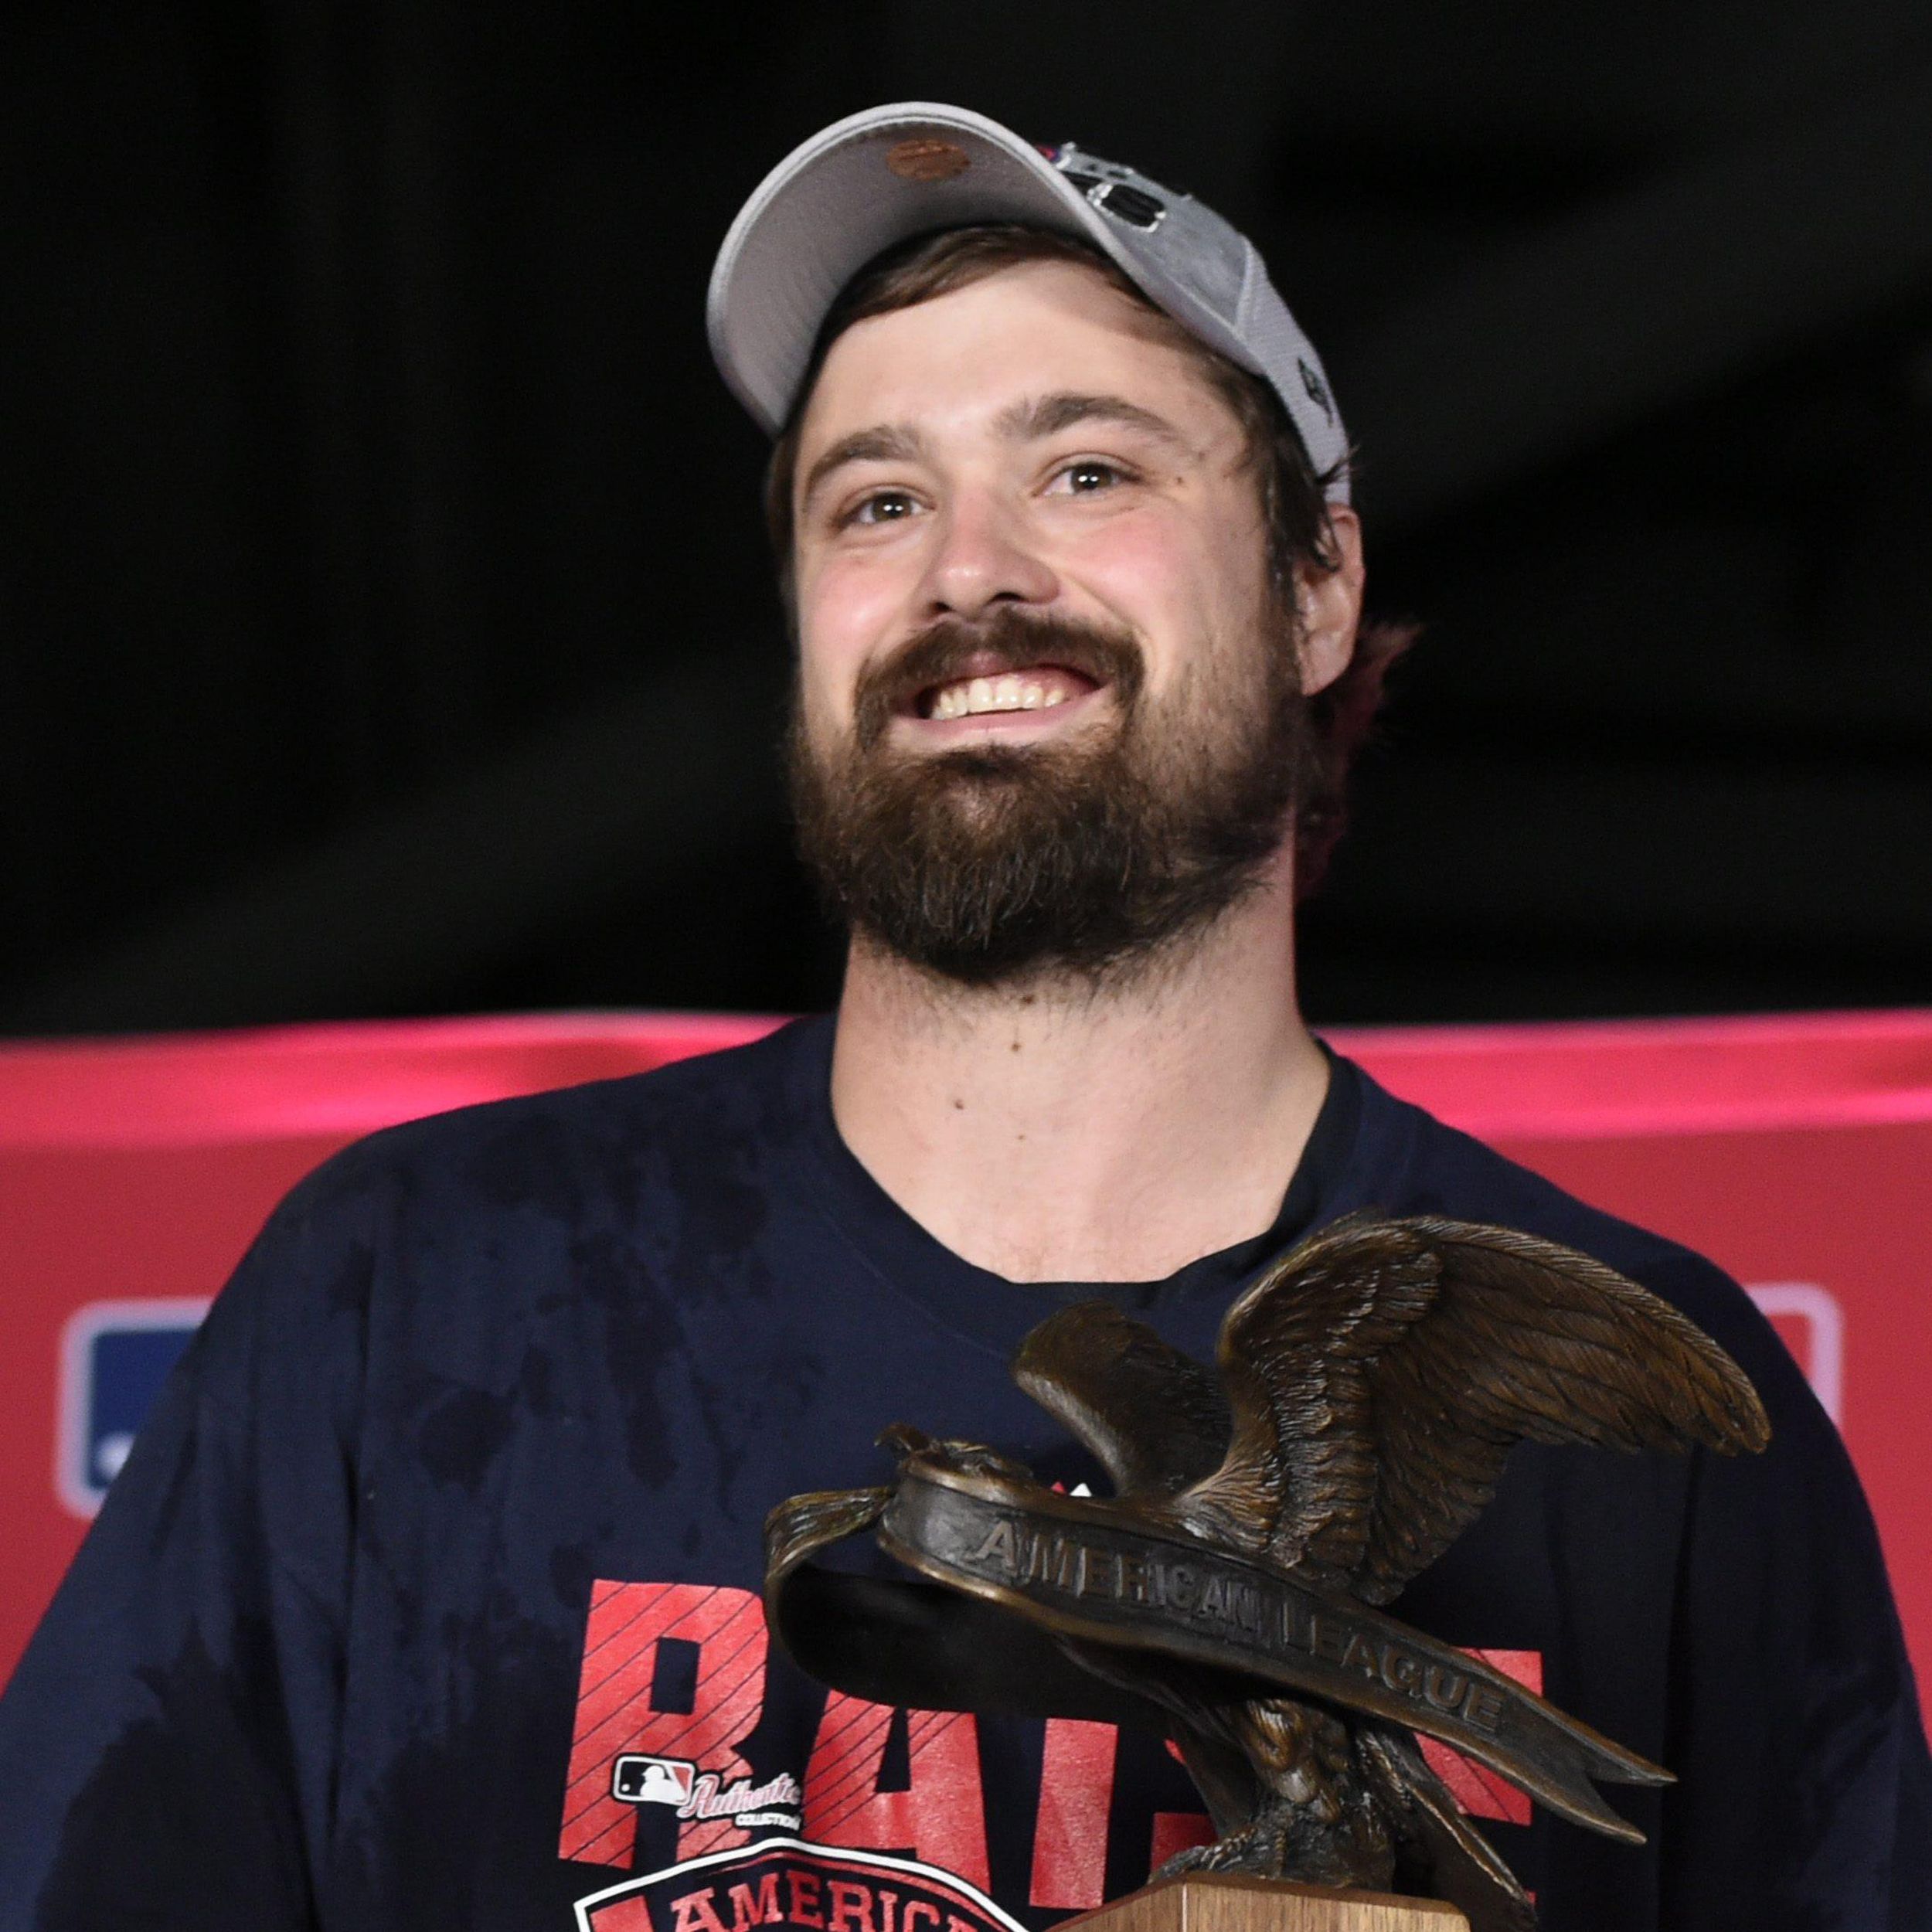 Andrew Miller: Indians ALCS MVP, UNC 2006 National Player of The